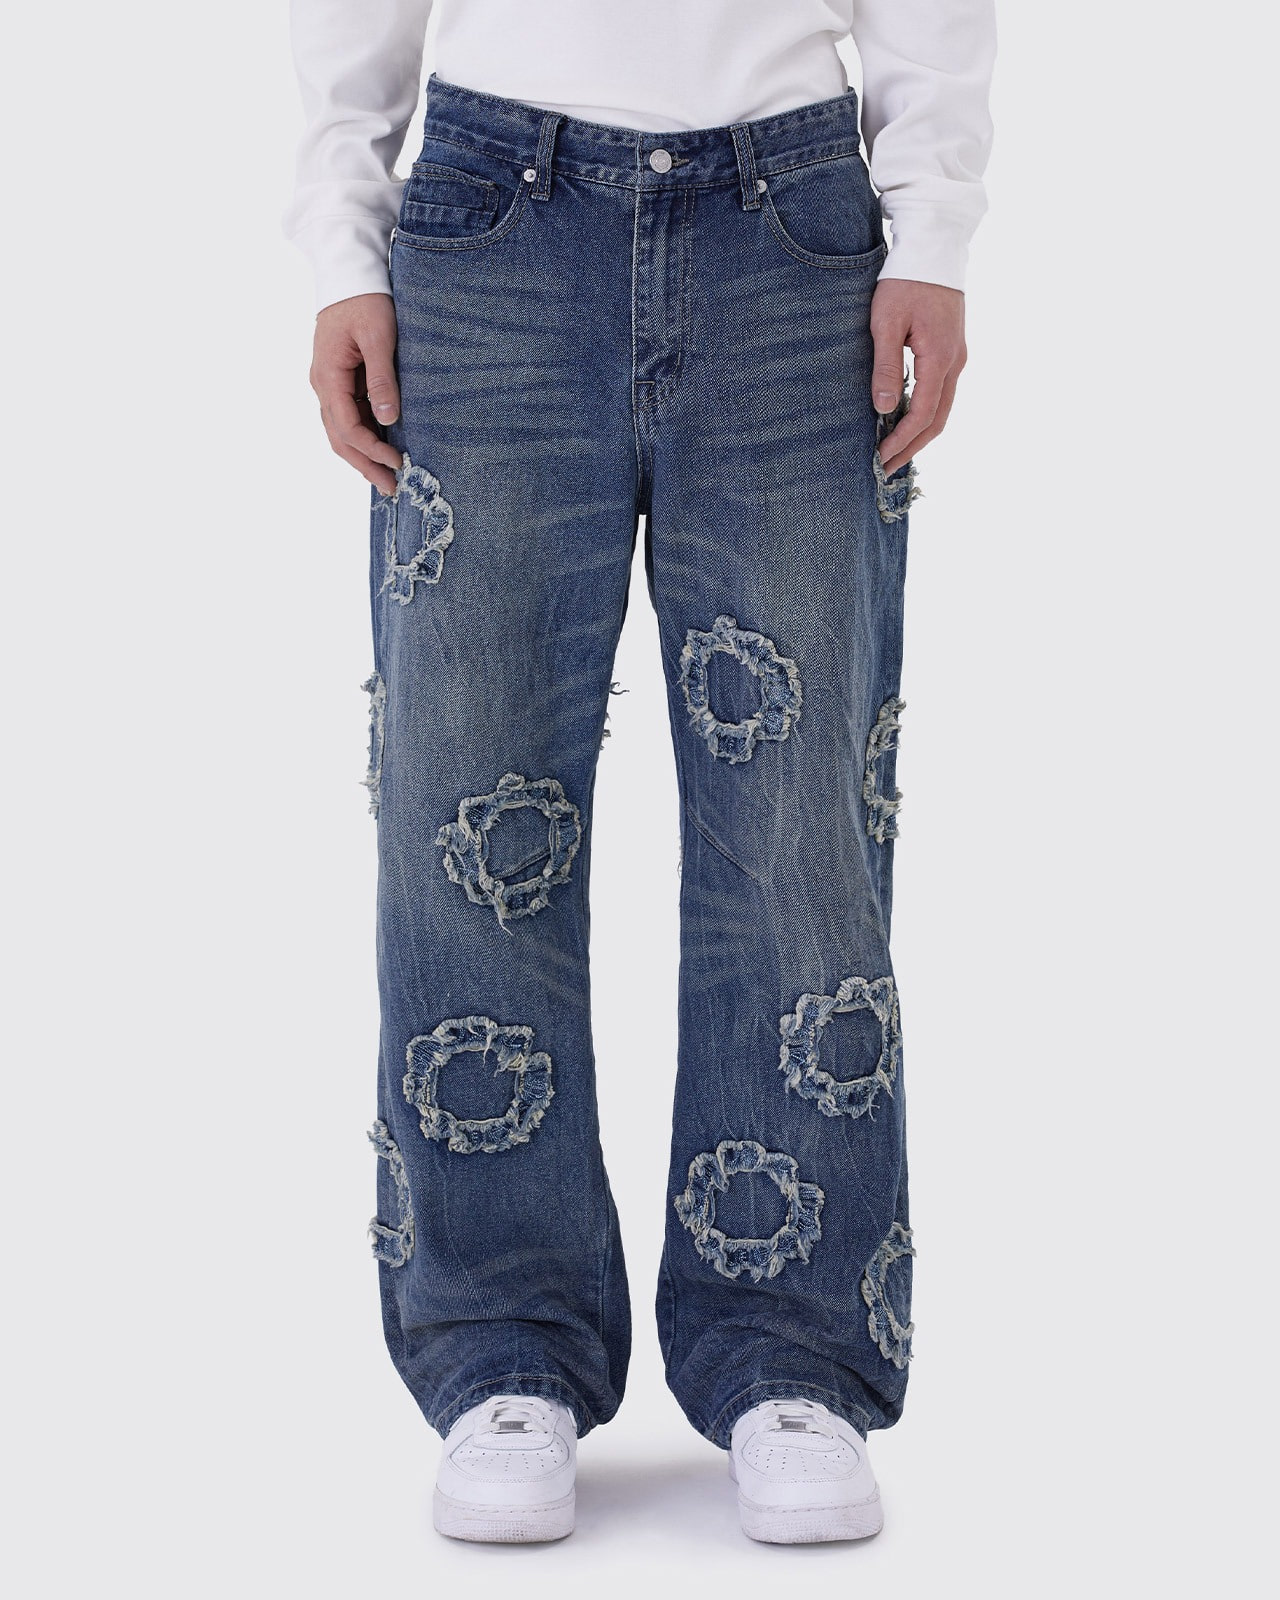 [SMOKE RISE X INSANE GARAGE] EMBROIDERED PATCHES JEANS_FORDHAM BLUE